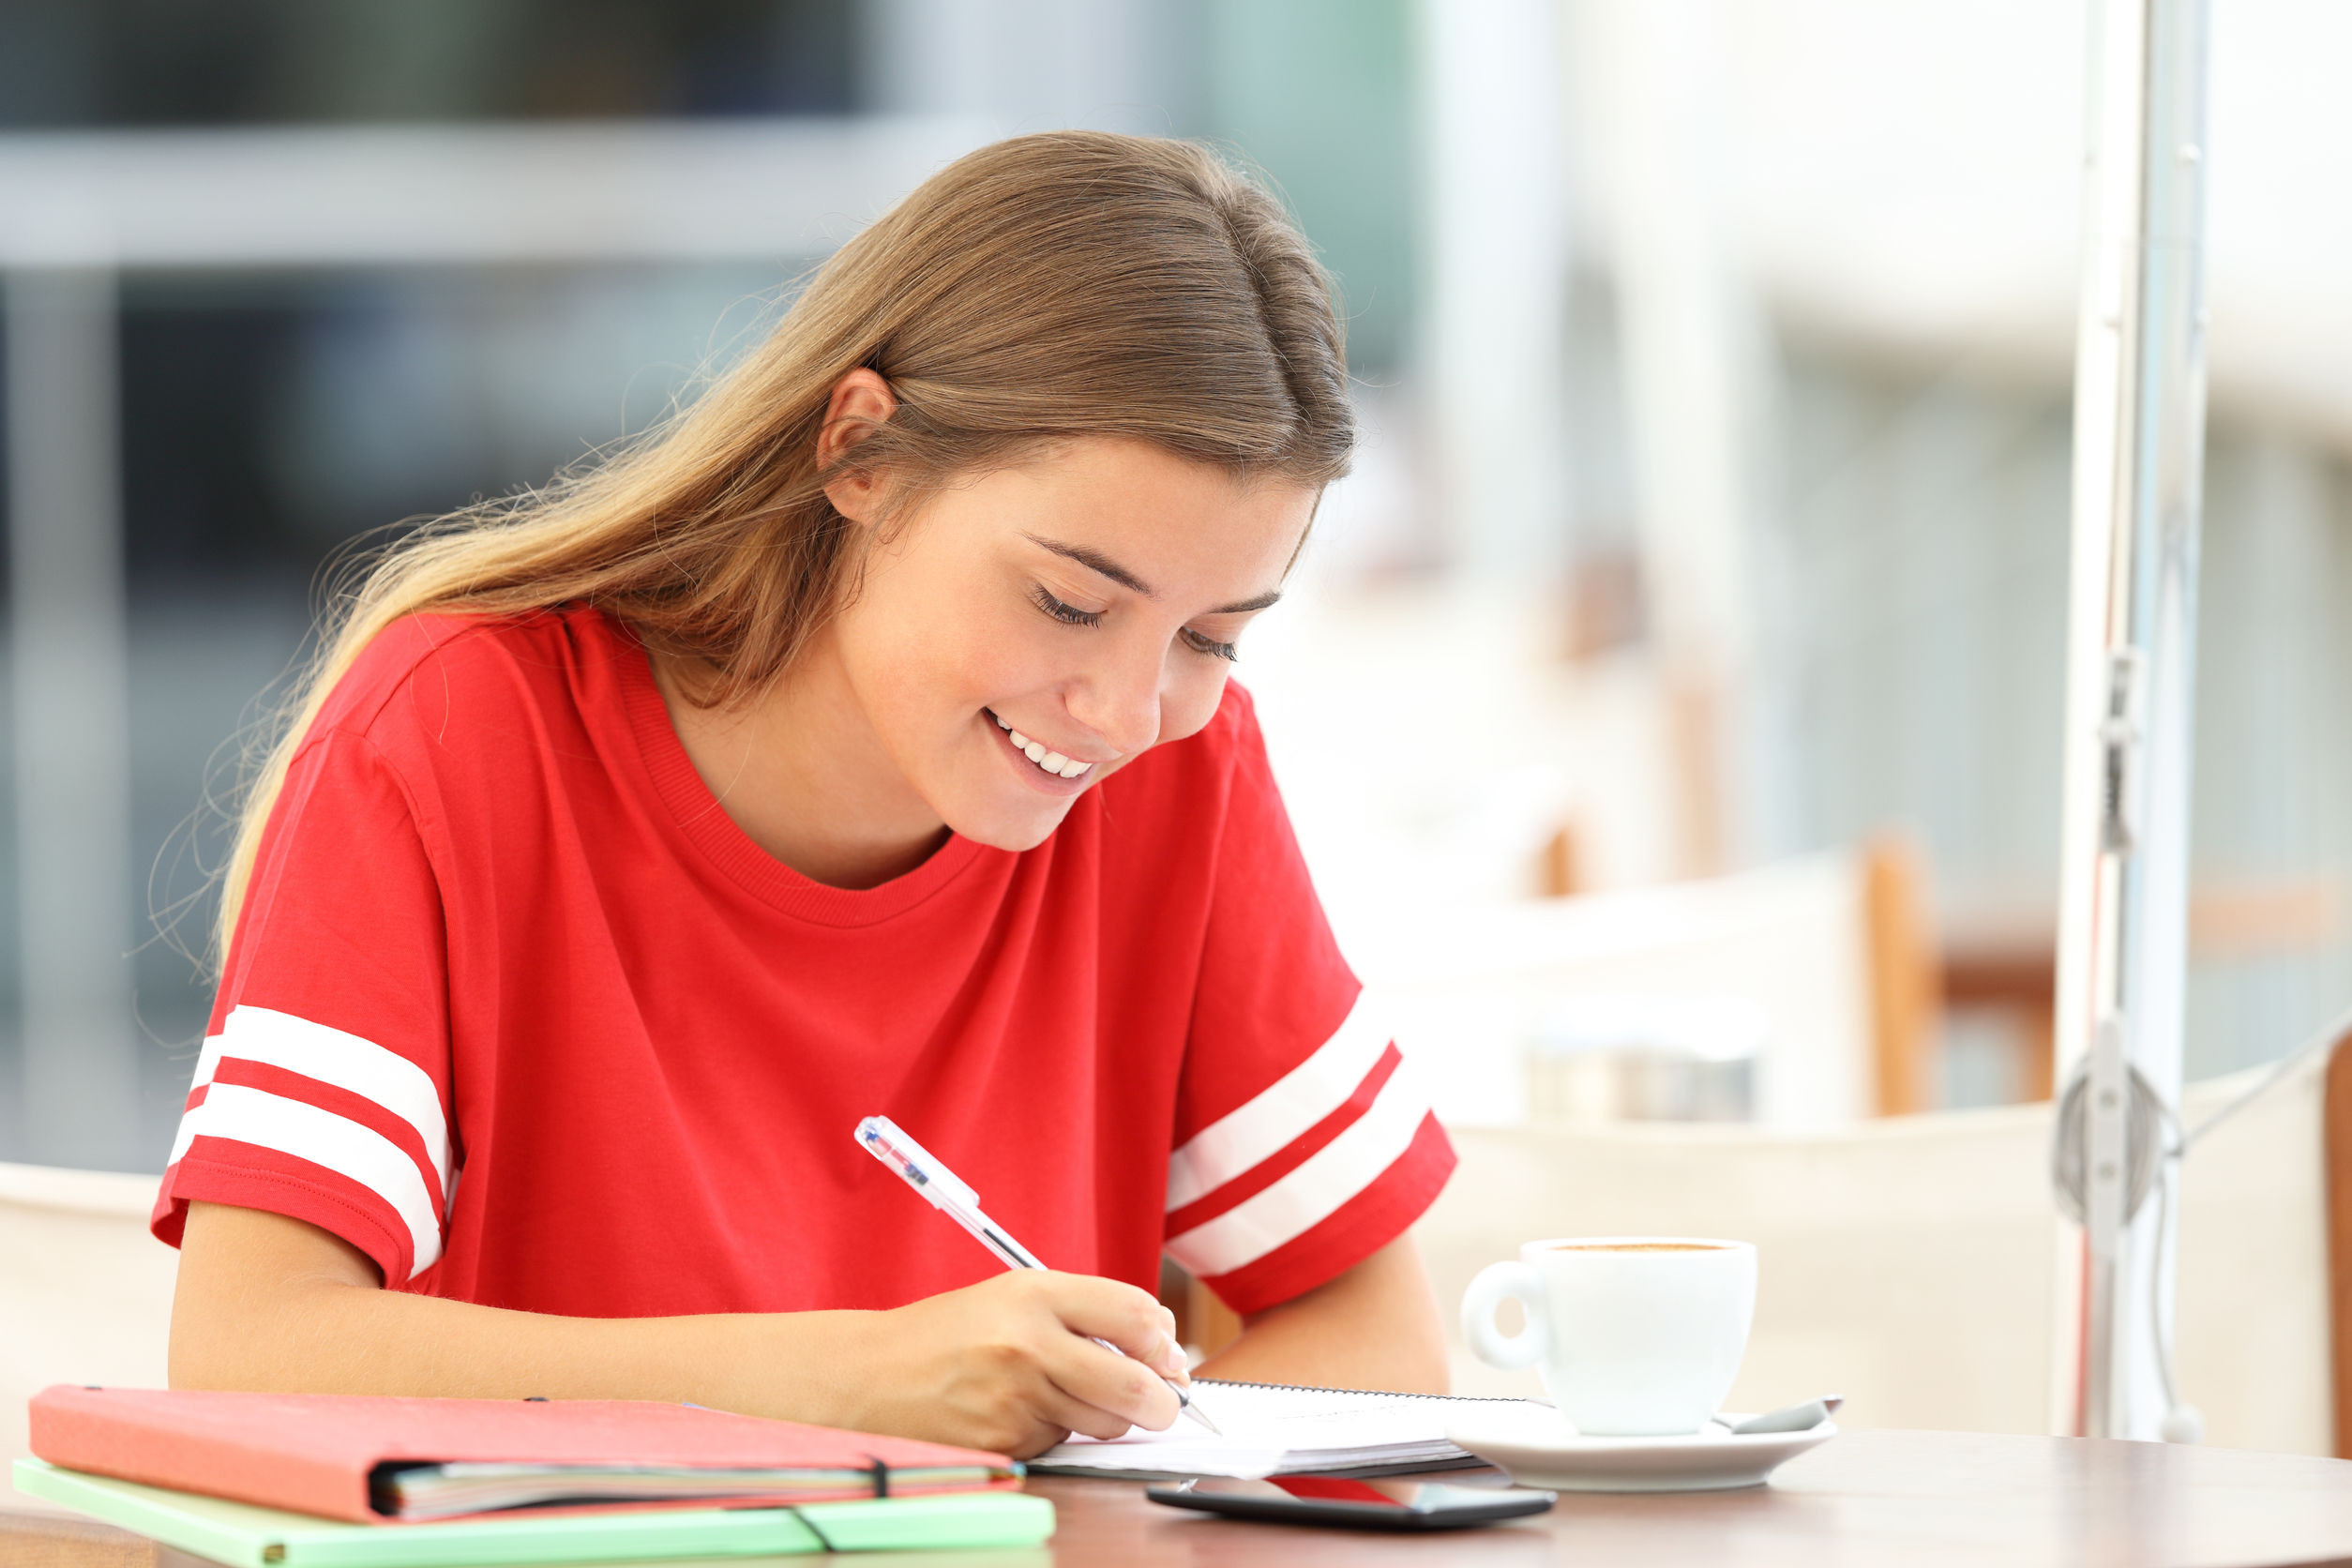 How to Write an Admission Essay?